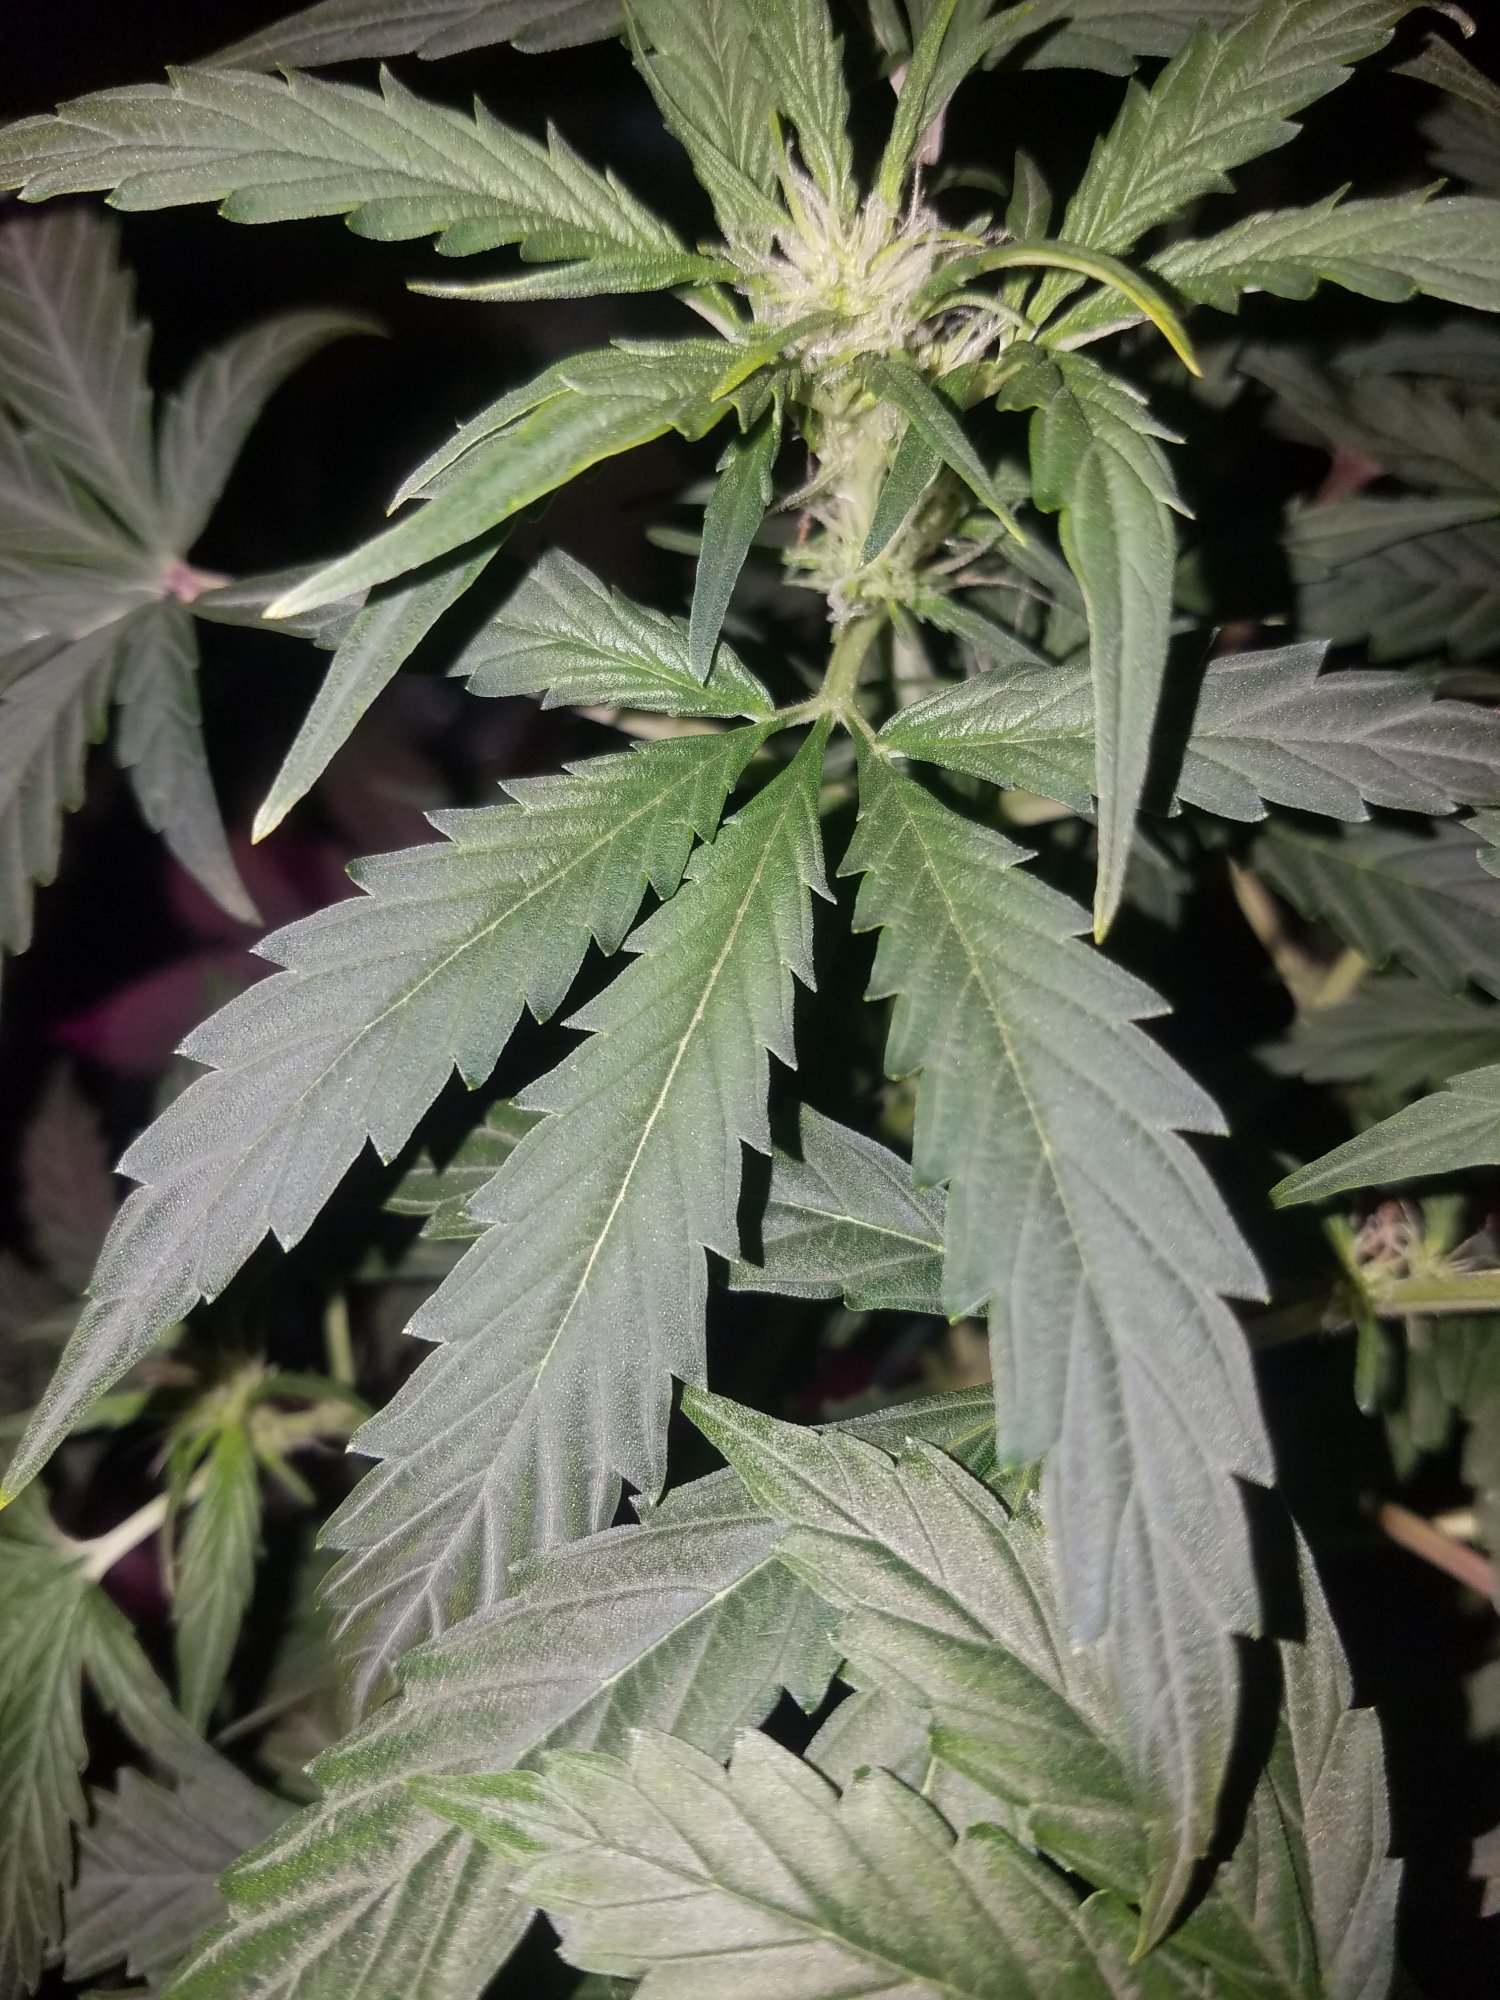 Really weird leaves nyc diesal auto